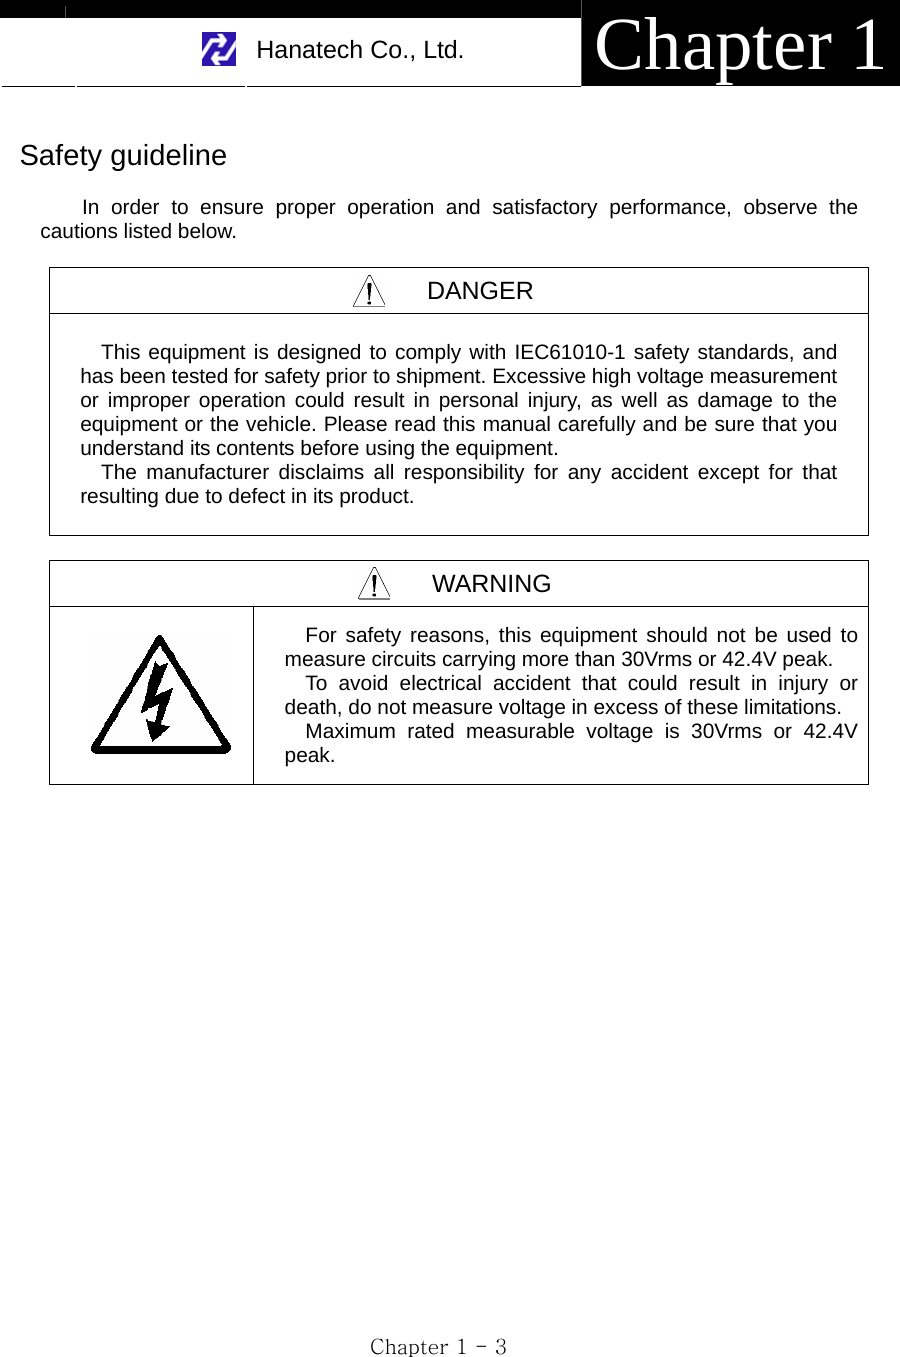     Hanatech Co., Ltd.  Chapter 1 Chapter 1 - 3  Safety guideline  In order to ensure proper operation and satisfactory performance, observe the cautions listed below.  DANGER   This equipment is designed to comply with IEC61010-1 safety standards, and has been tested for safety prior to shipment. Excessive high voltage measurement or improper operation could result in personal injury, as well as damage to the equipment or the vehicle. Please read this manual carefully and be sure that you understand its contents before using the equipment.         The manufacturer disclaims all responsibility for any accident except for that resulting due to defect in its product.  WARNING    For safety reasons, this equipment should not be used to measure circuits carrying more than 30Vrms or 42.4V peak. To avoid electrical accident that could result in injury or death, do not measure voltage in excess of these limitations. Maximum rated measurable voltage is 30Vrms or 42.4V peak.   